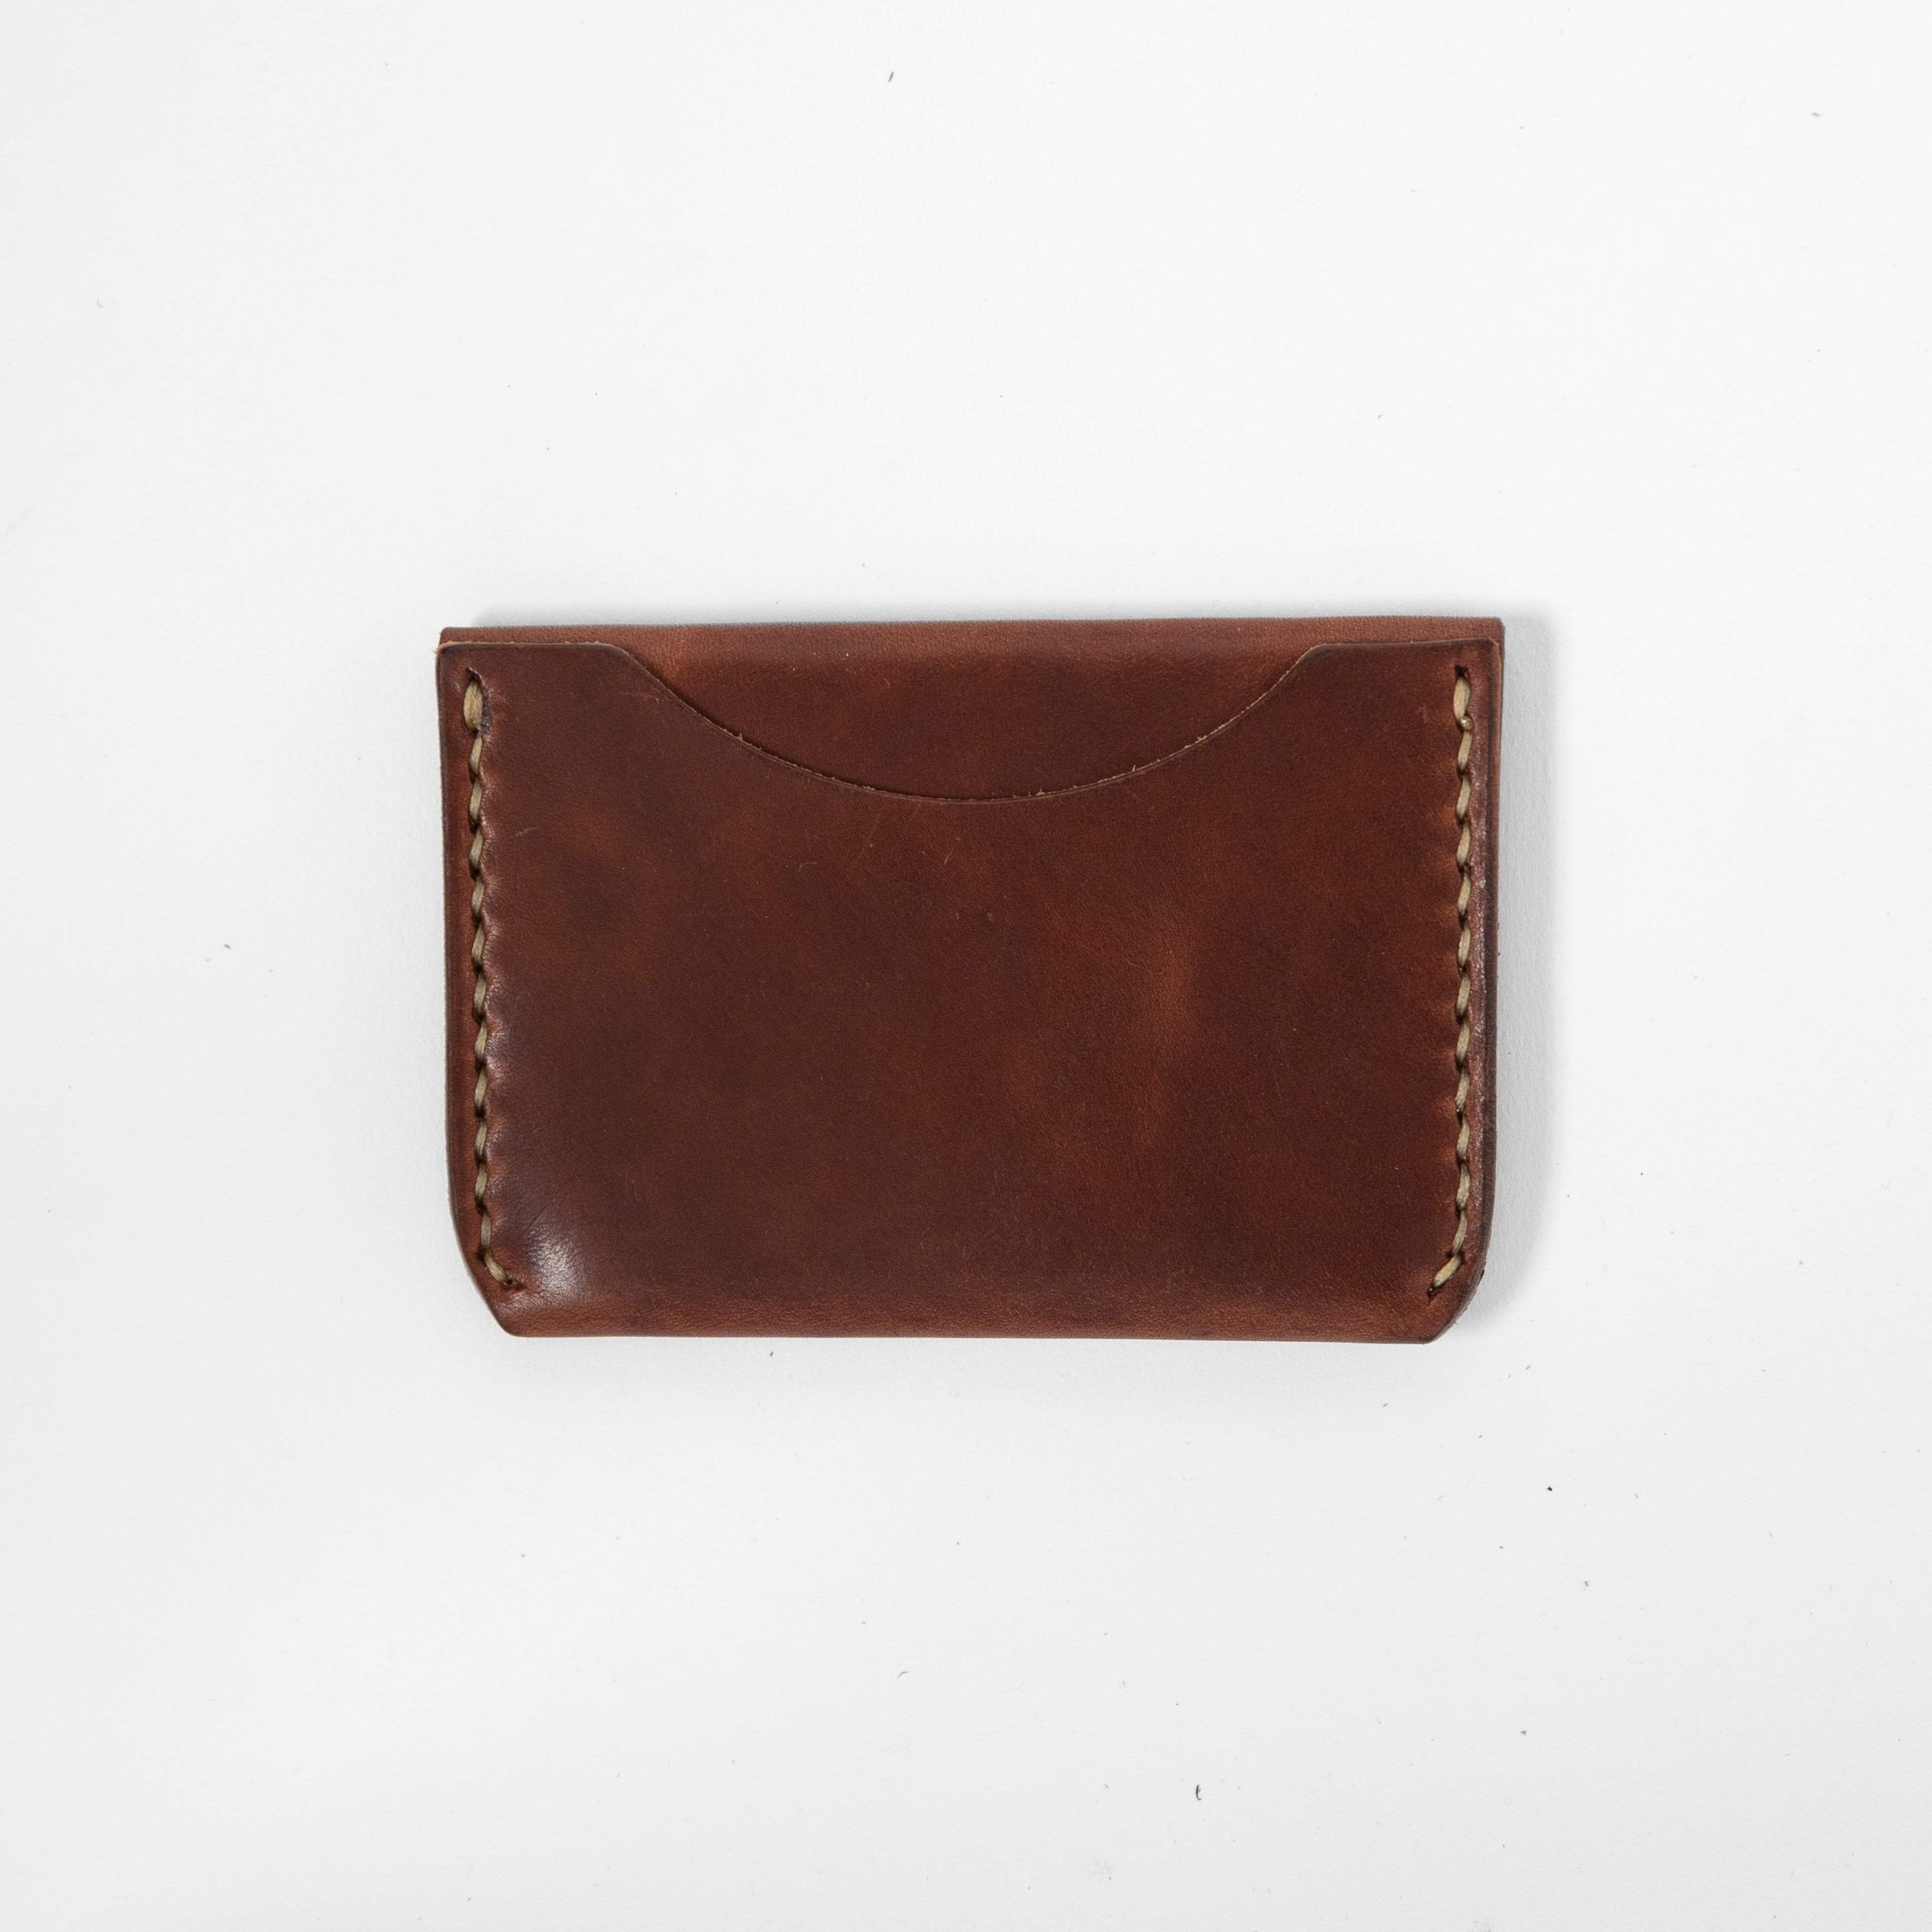 Medium Brown Flap Wallet- mens leather wallet - handmade leather wallets at KMM &amp; Co.